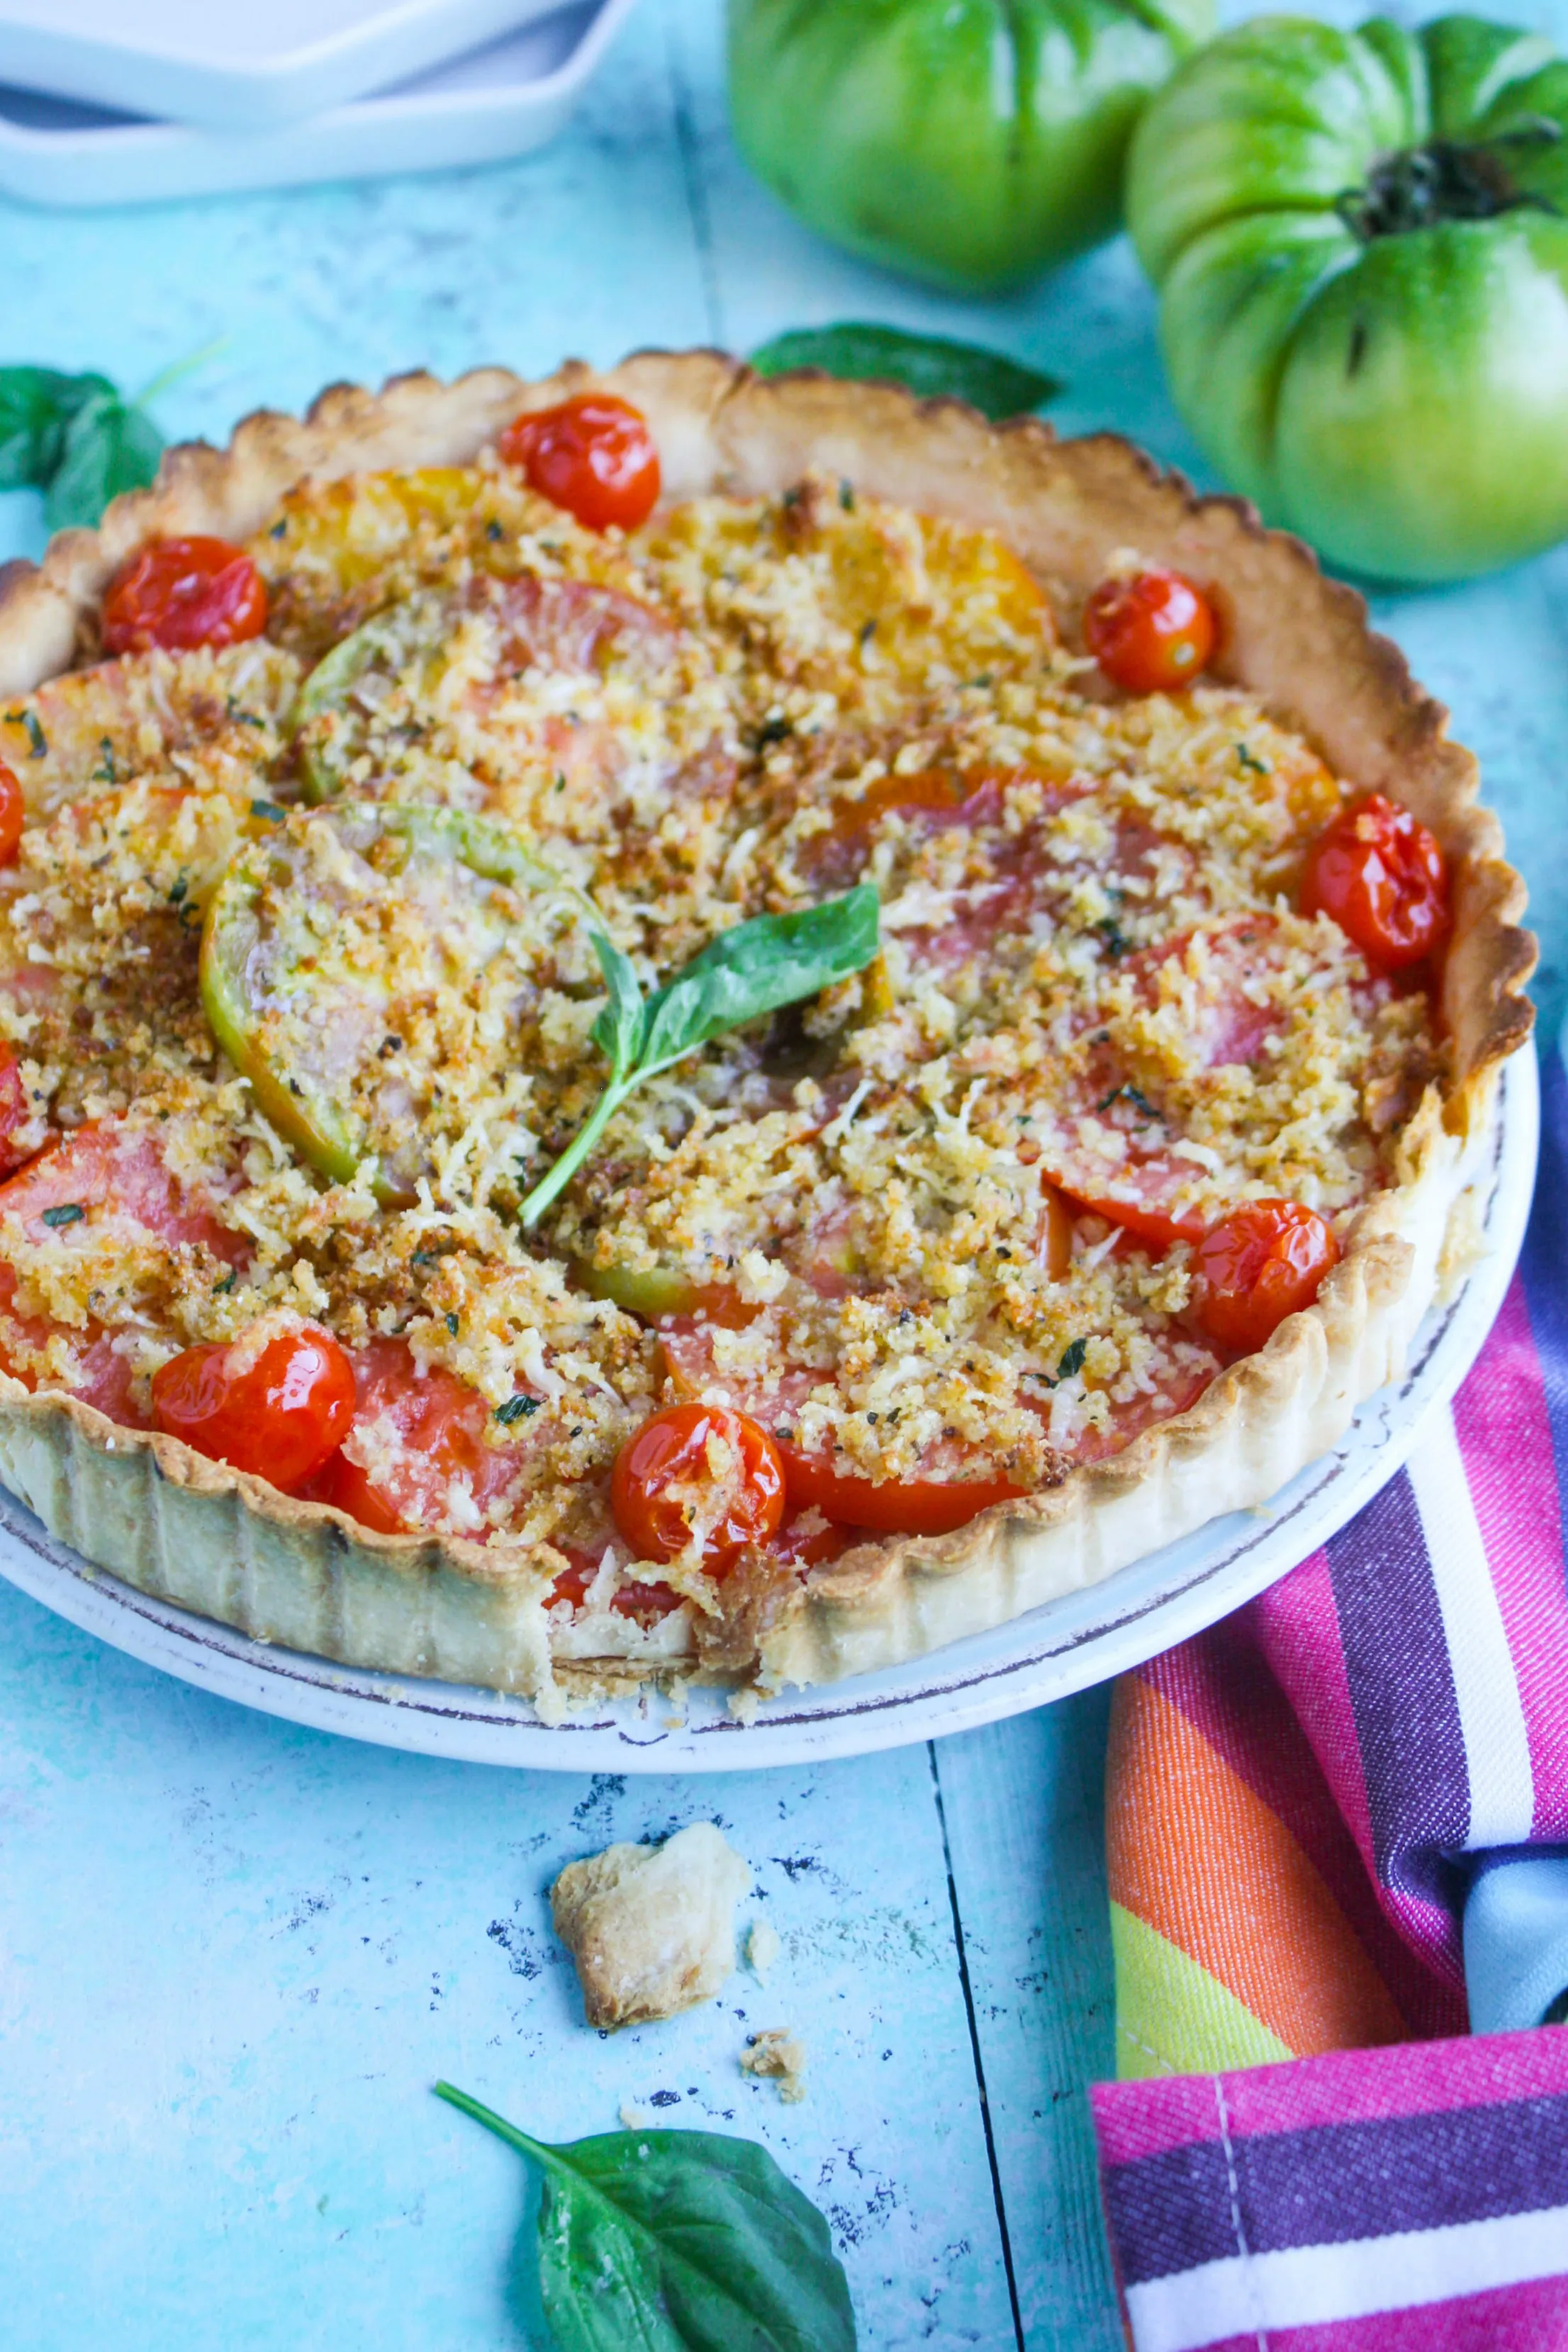 Tomato Tart with Cheesy Breadcrumbs is a wonderfully simple and flavorful dish you need to make before the summer is over! This simple tart is big on flavor.